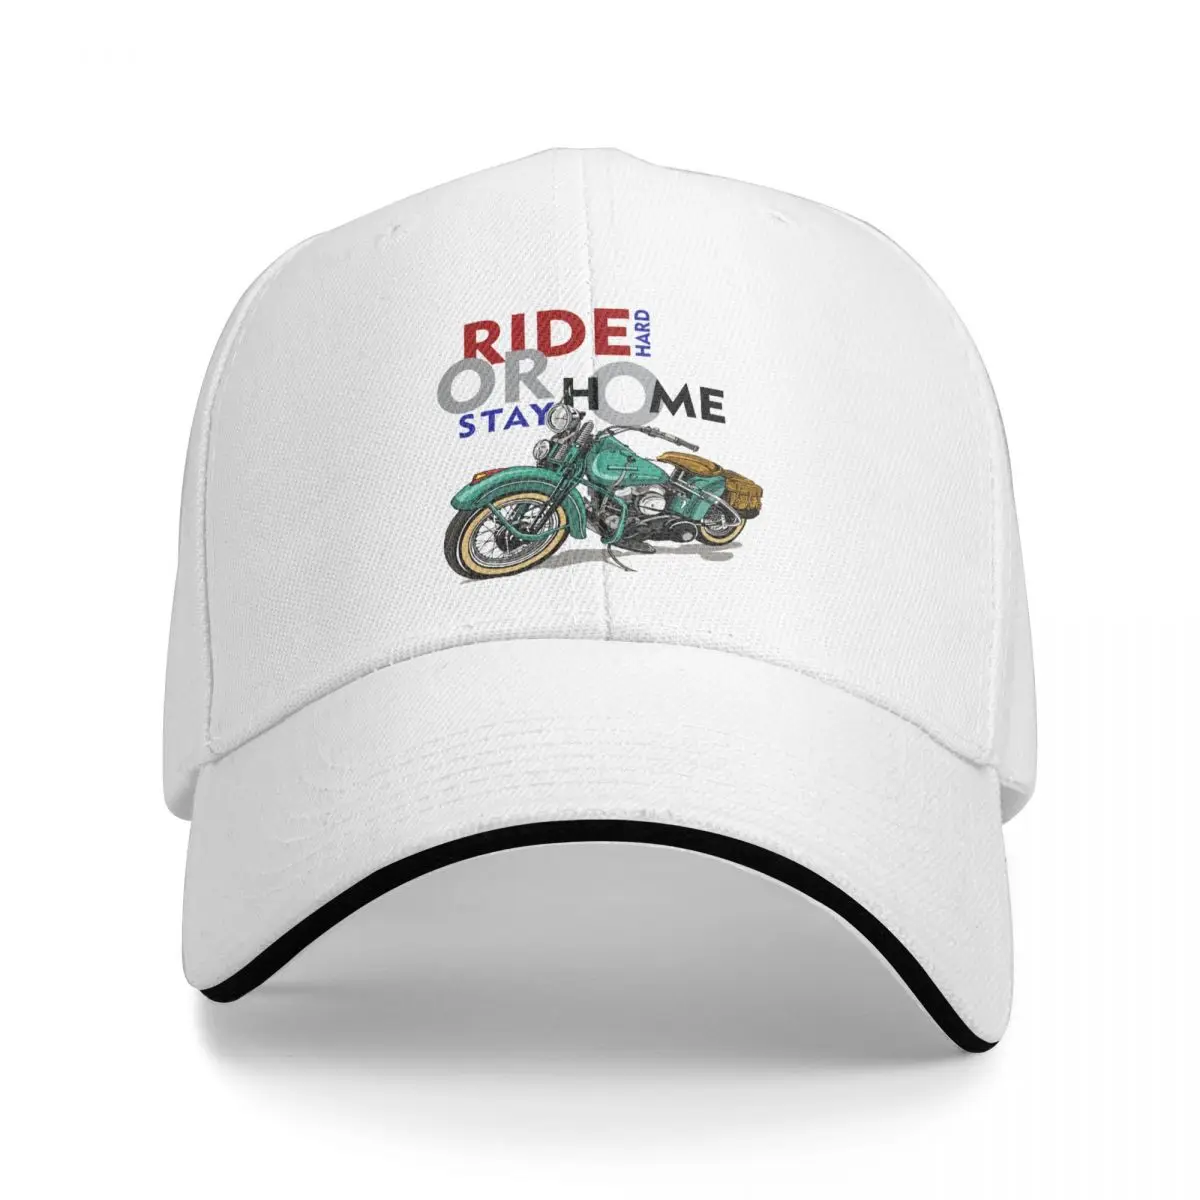 

Vintage Chopper Motorcycle Rider Trucker Cap Merch Classic Cafe Racer Snapback Hat For for Men Women Casquette Fit All Size